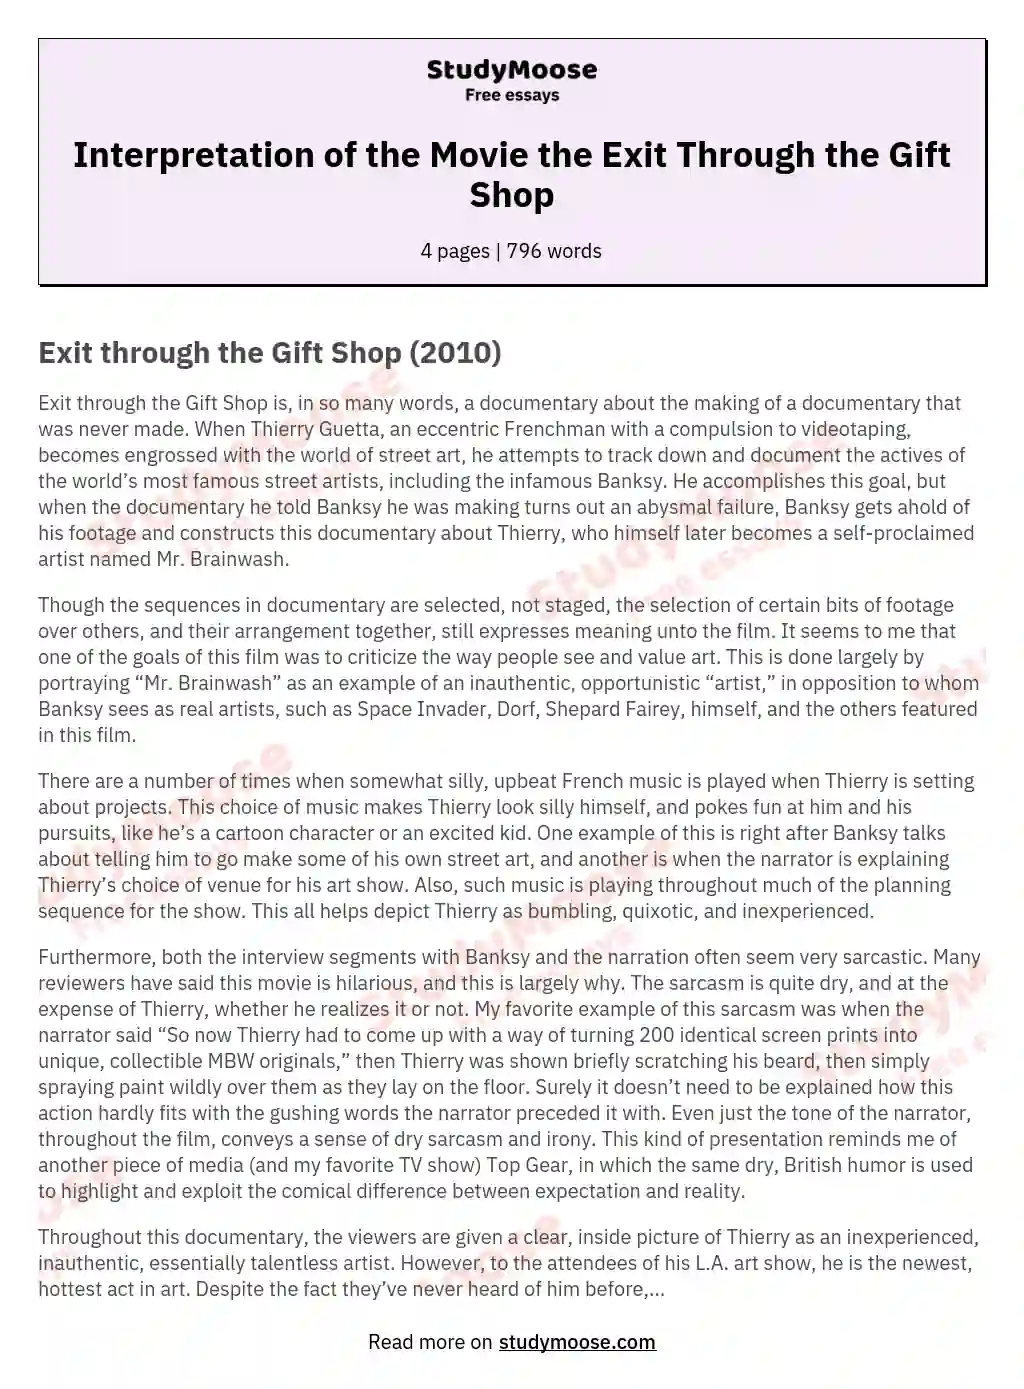 Interpretation of the Movie the Exit Through the Gift Shop essay